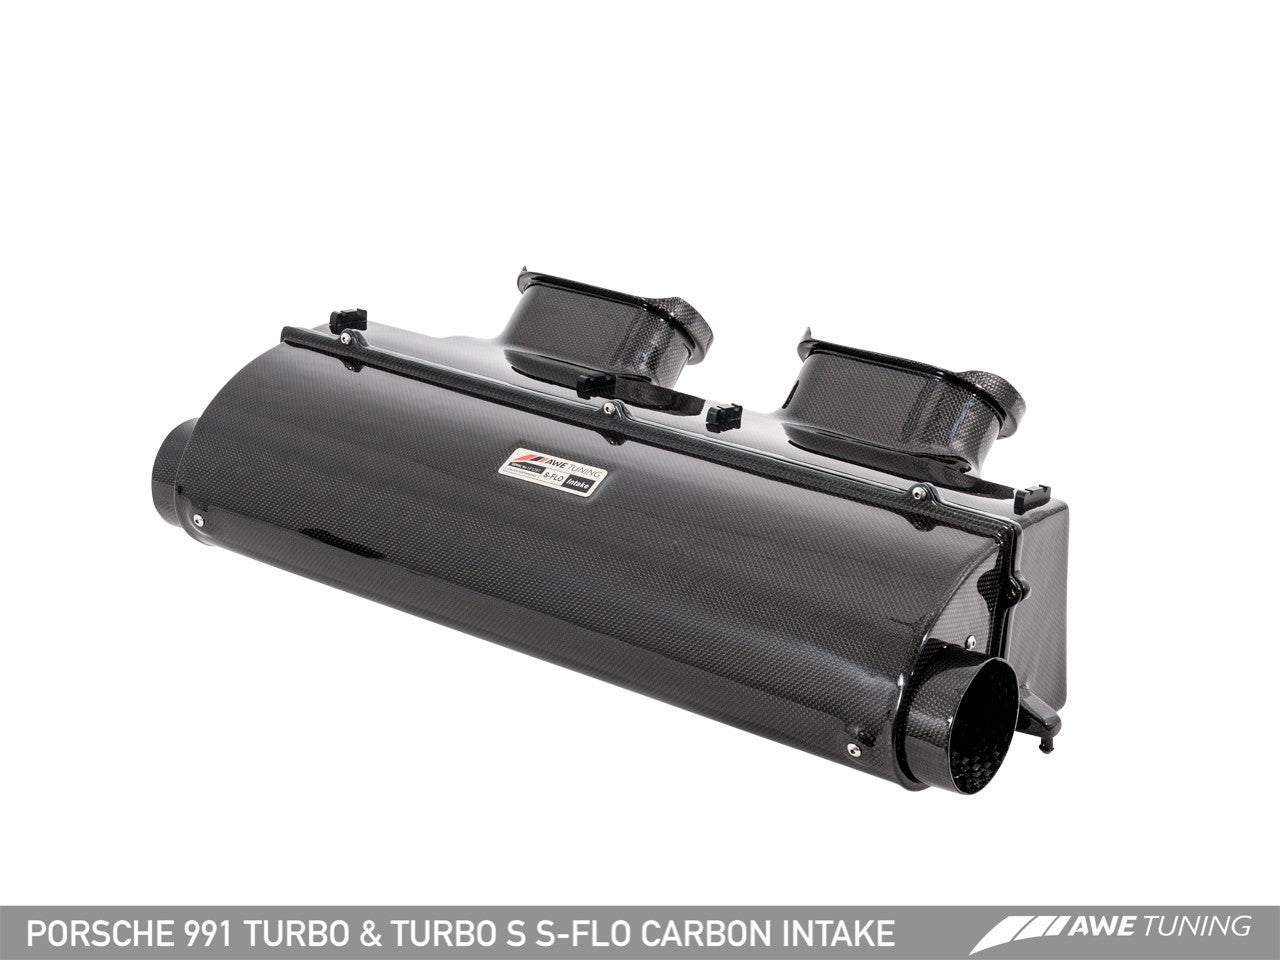 AWE S-FLO Carbon Intake for Porsche 991.1 / 991.2 Turbo and Turbo S